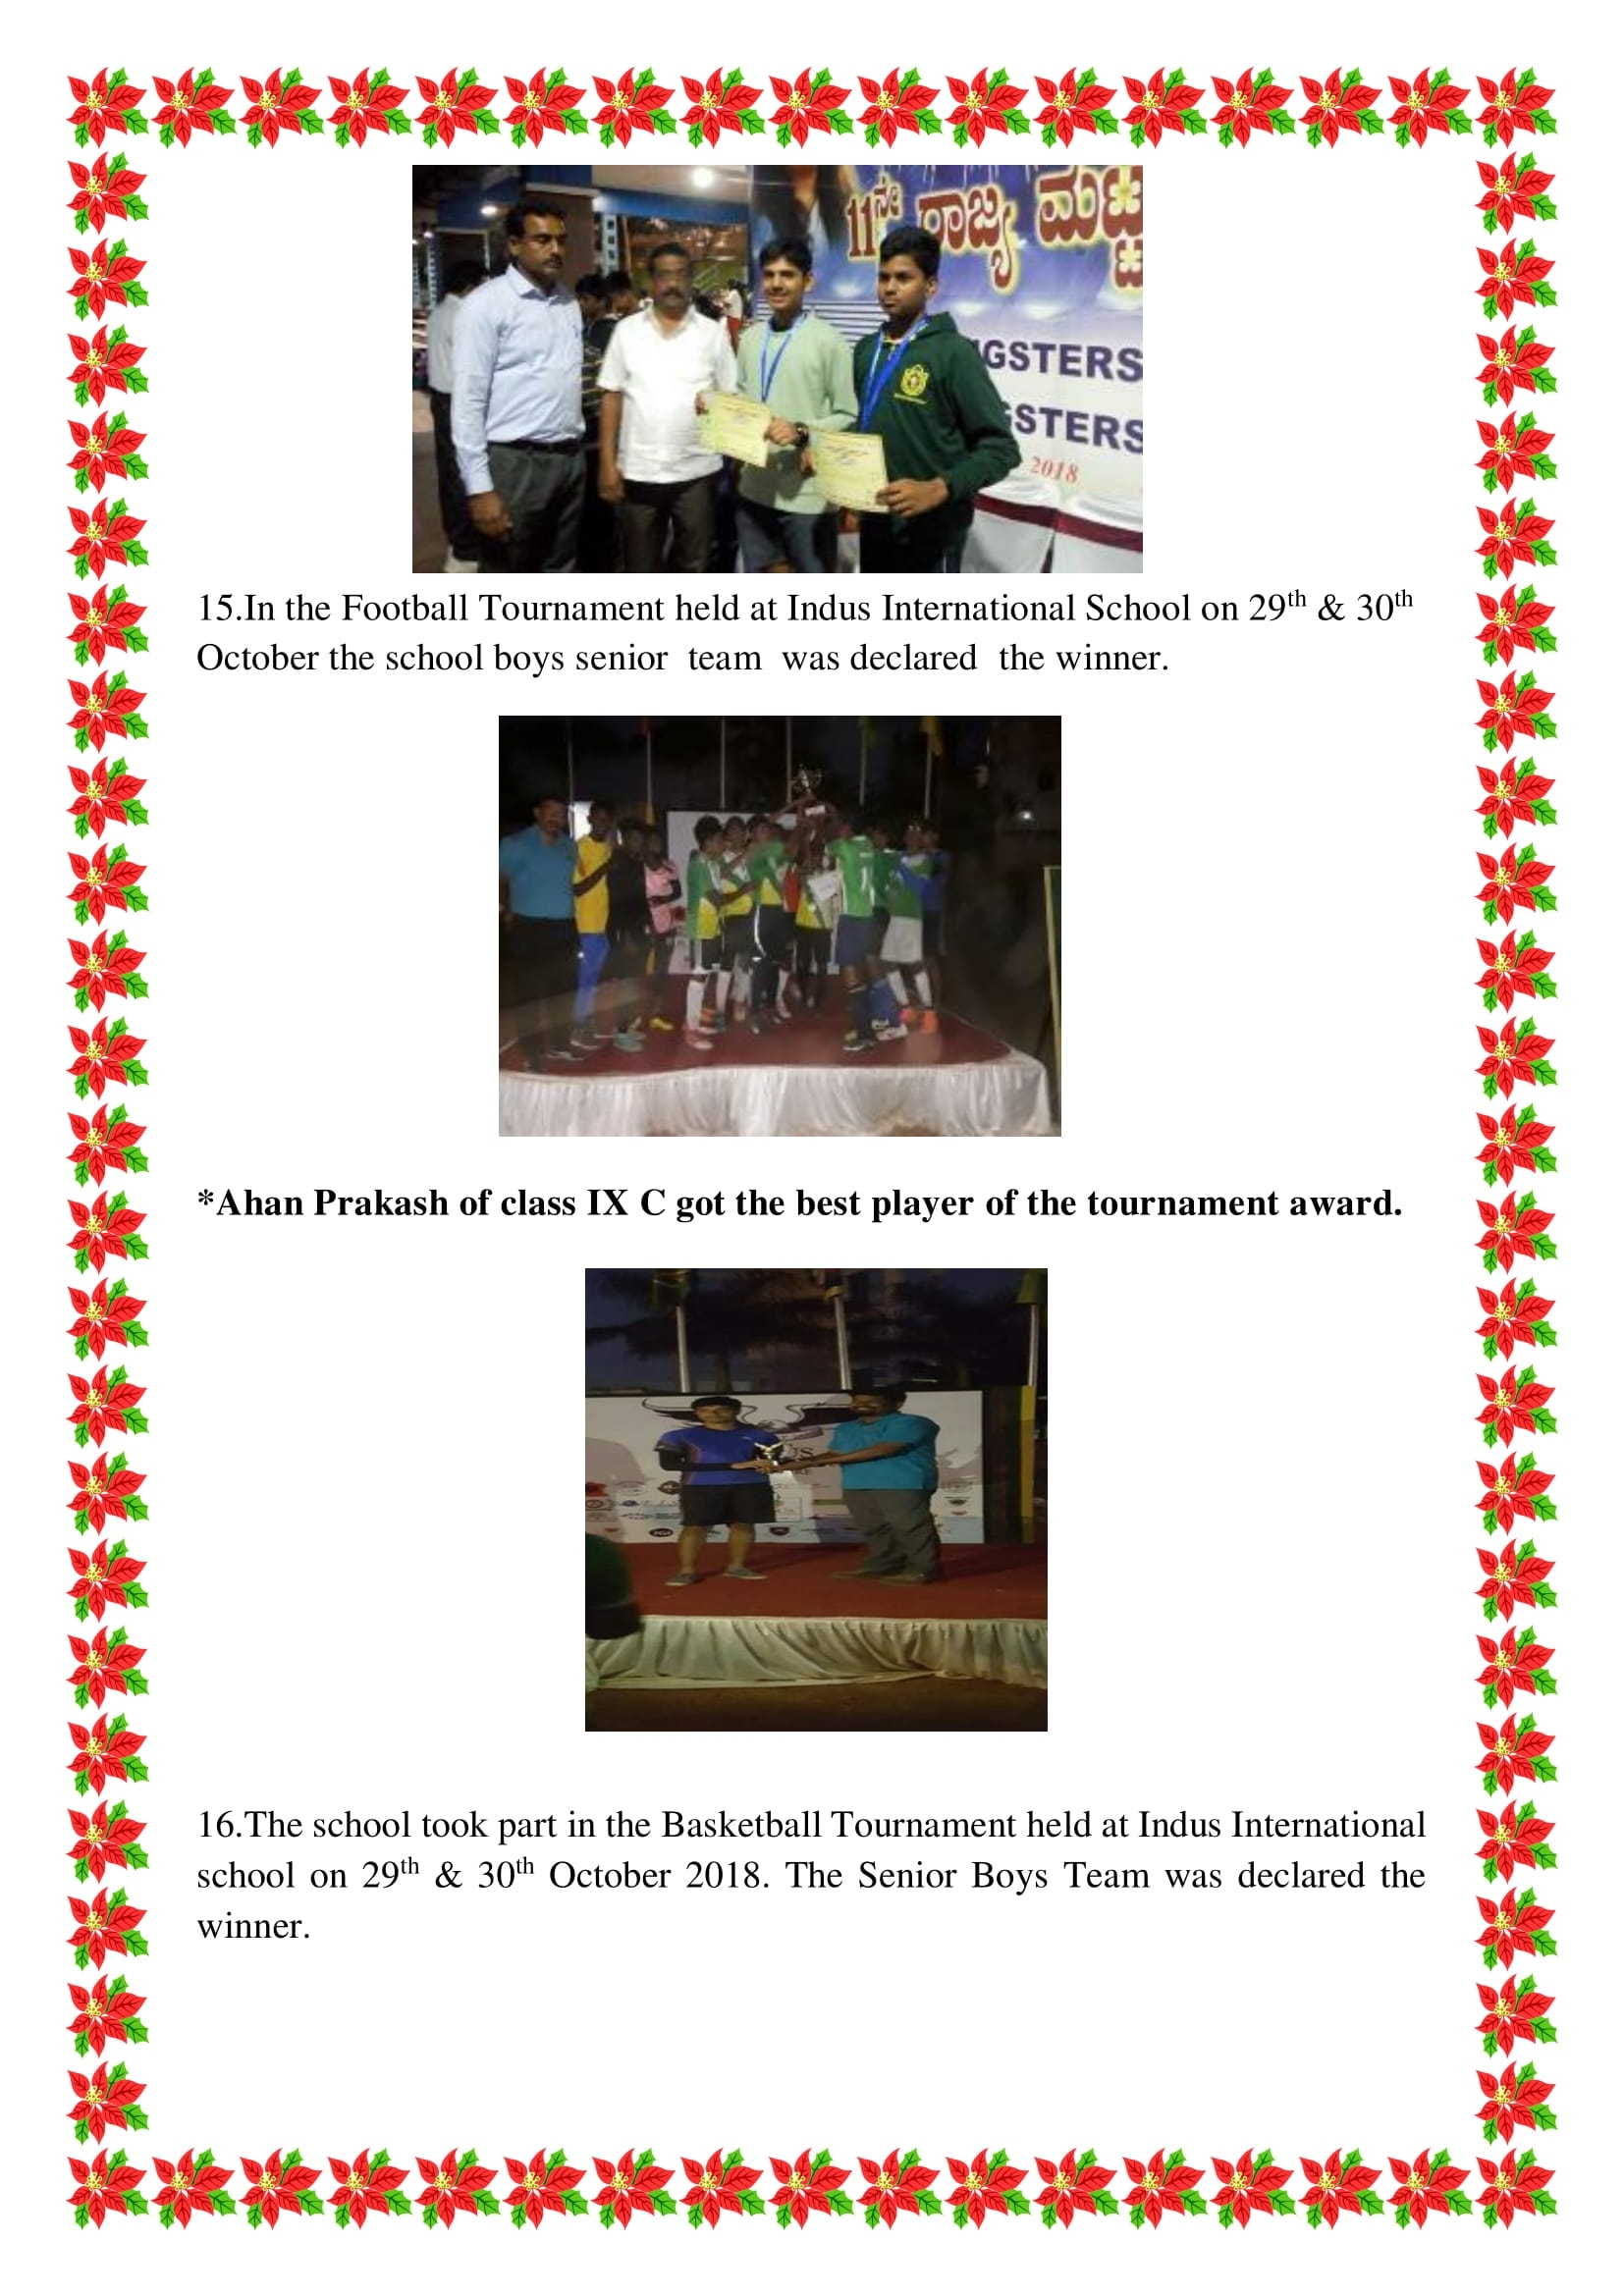 Sports News Letter -October-2018 - Dps Bangalore